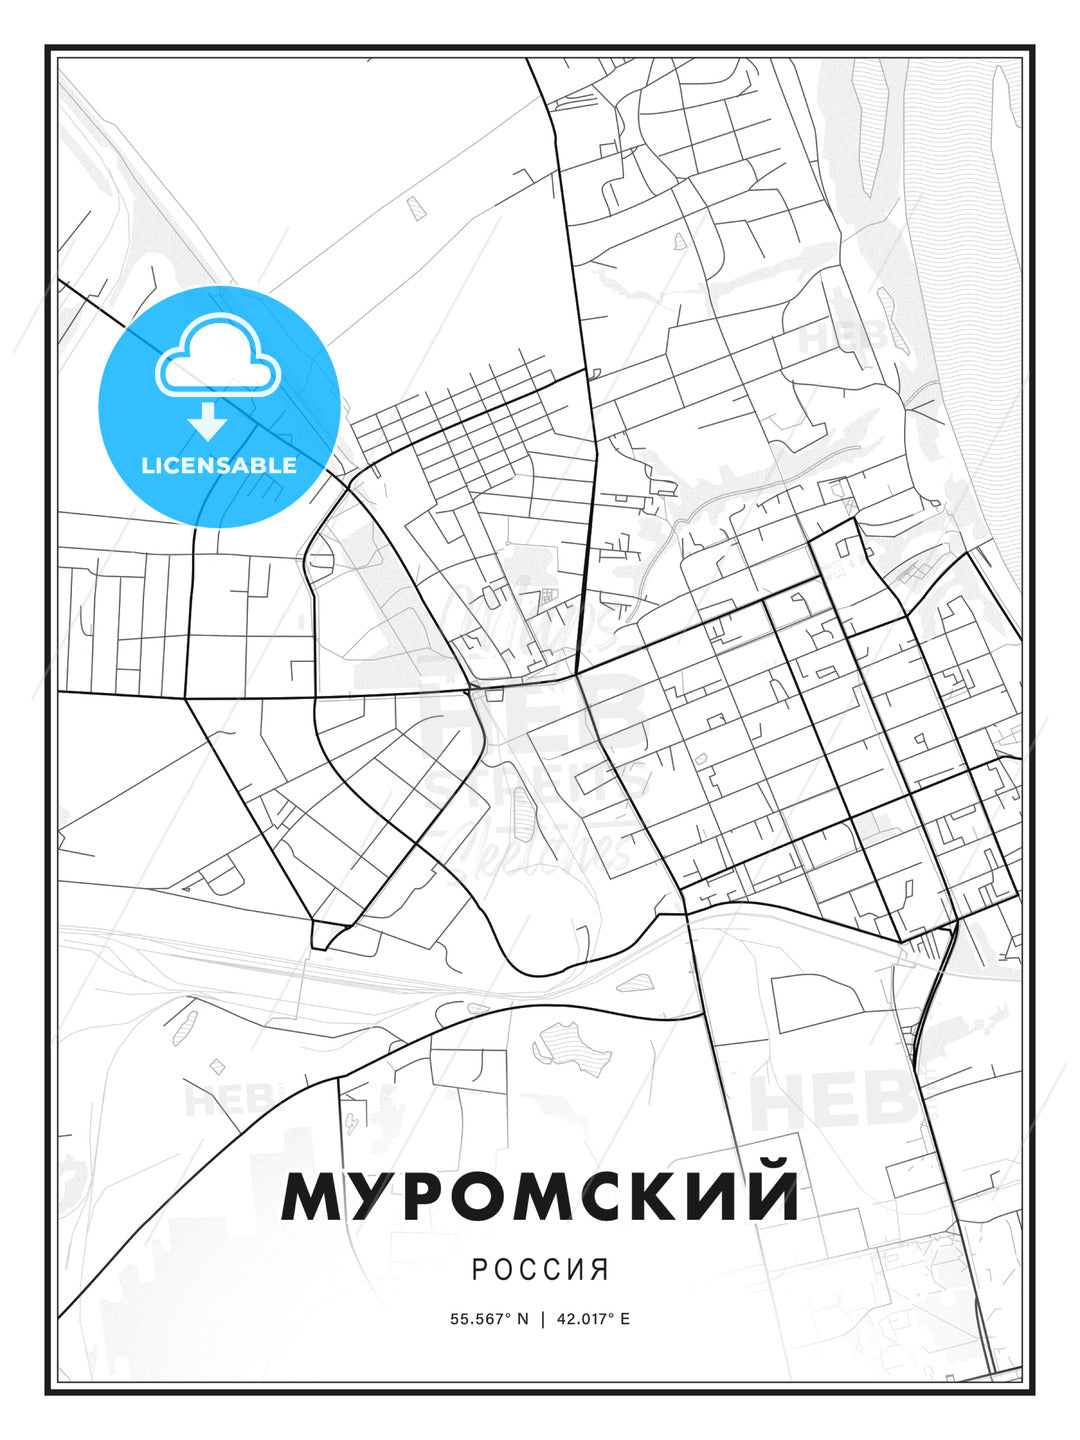 МУРОМСКИЙ / Murom, Russia, Modern Print Template in Various Formats - HEBSTREITS Sketches